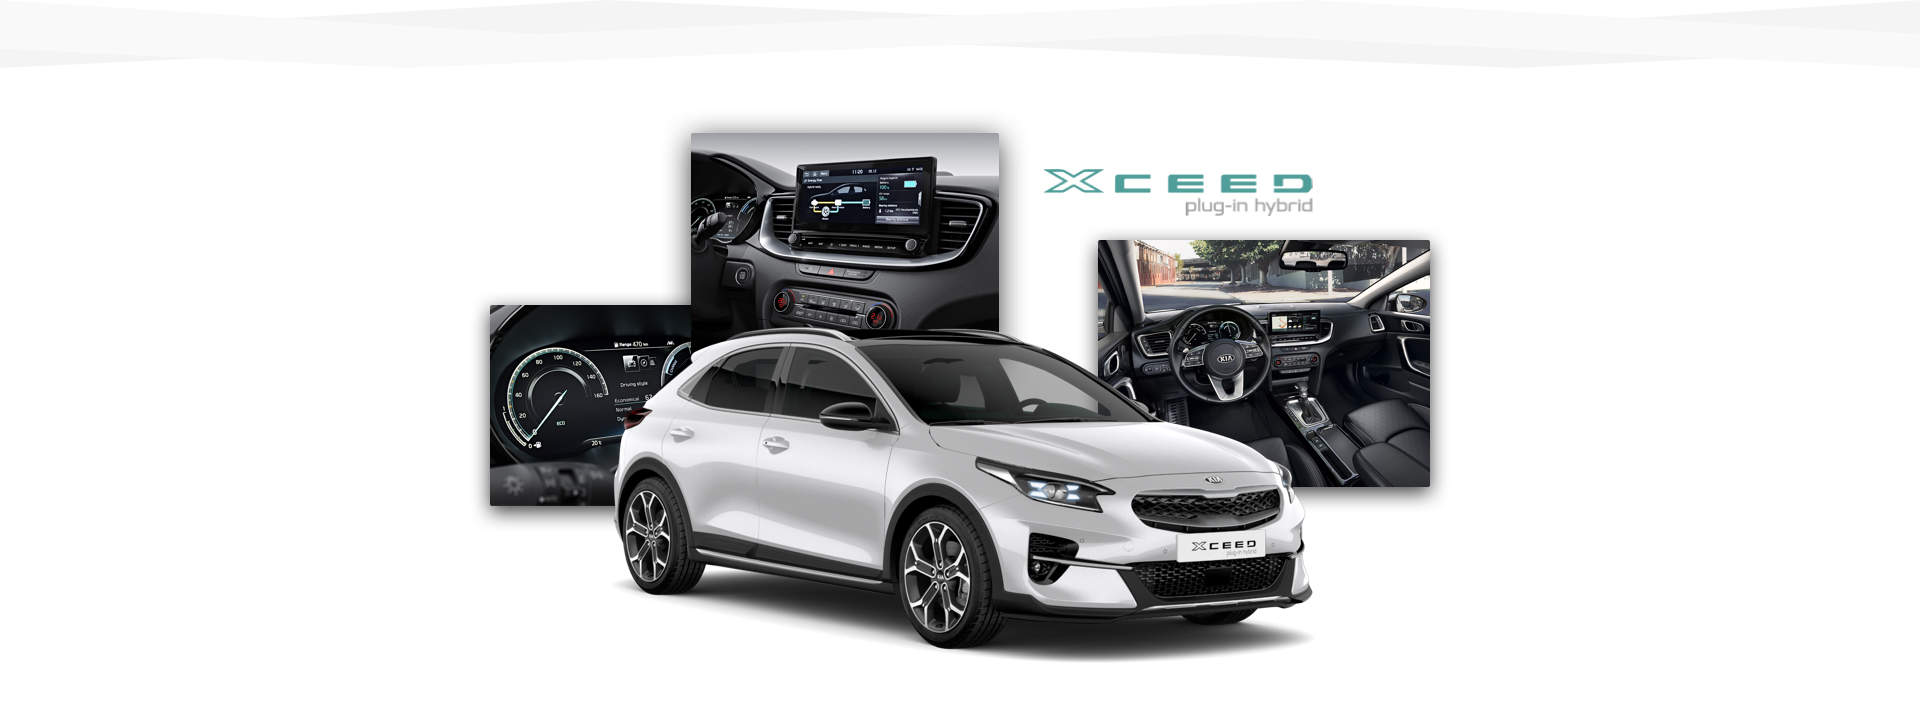 Side view of the Kia Xceed Plug-in Hybrid and shots of its interior, navigation screen and instrument cluster